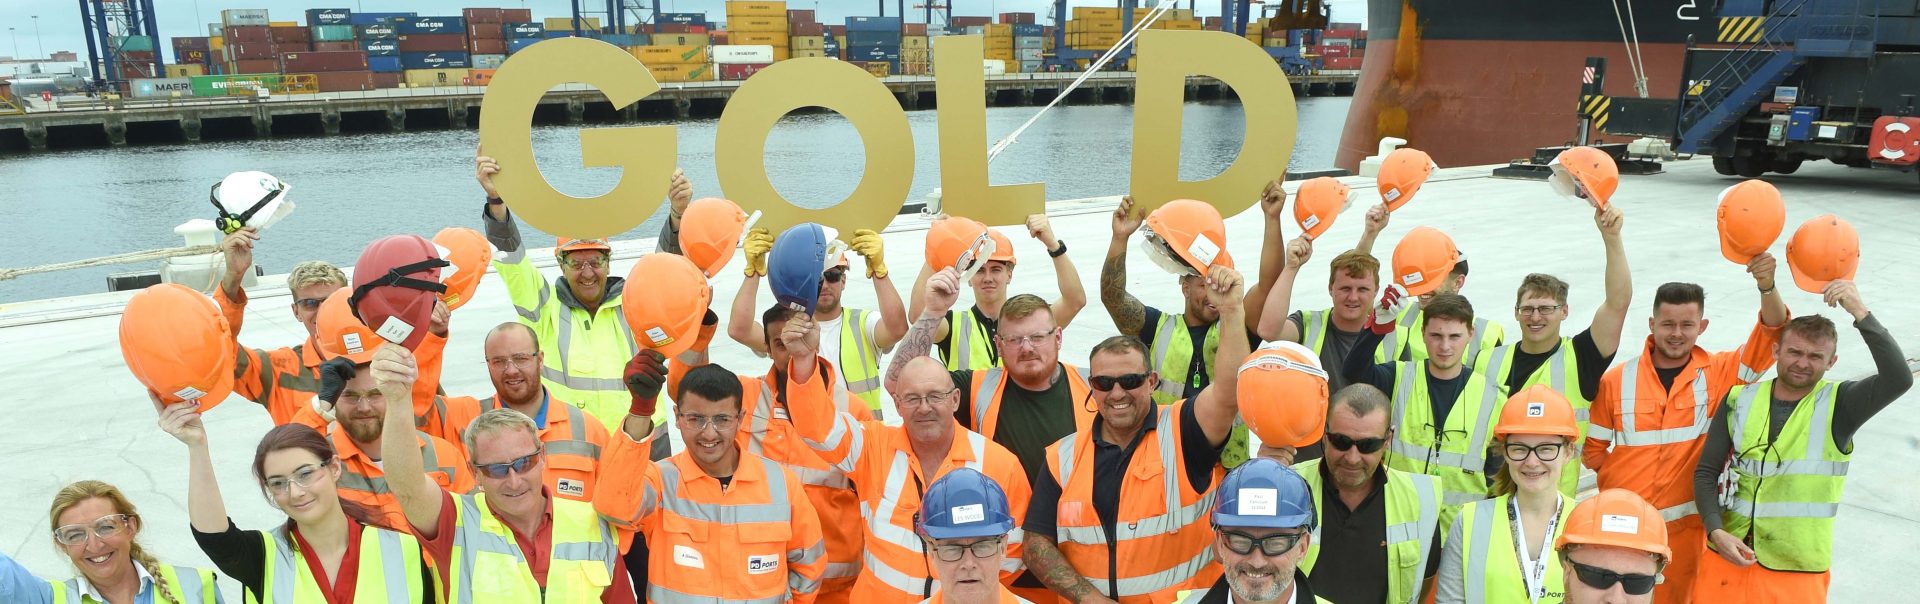 Gold award for PD Ports’ health and safety standards at prestigious RoSPA awards